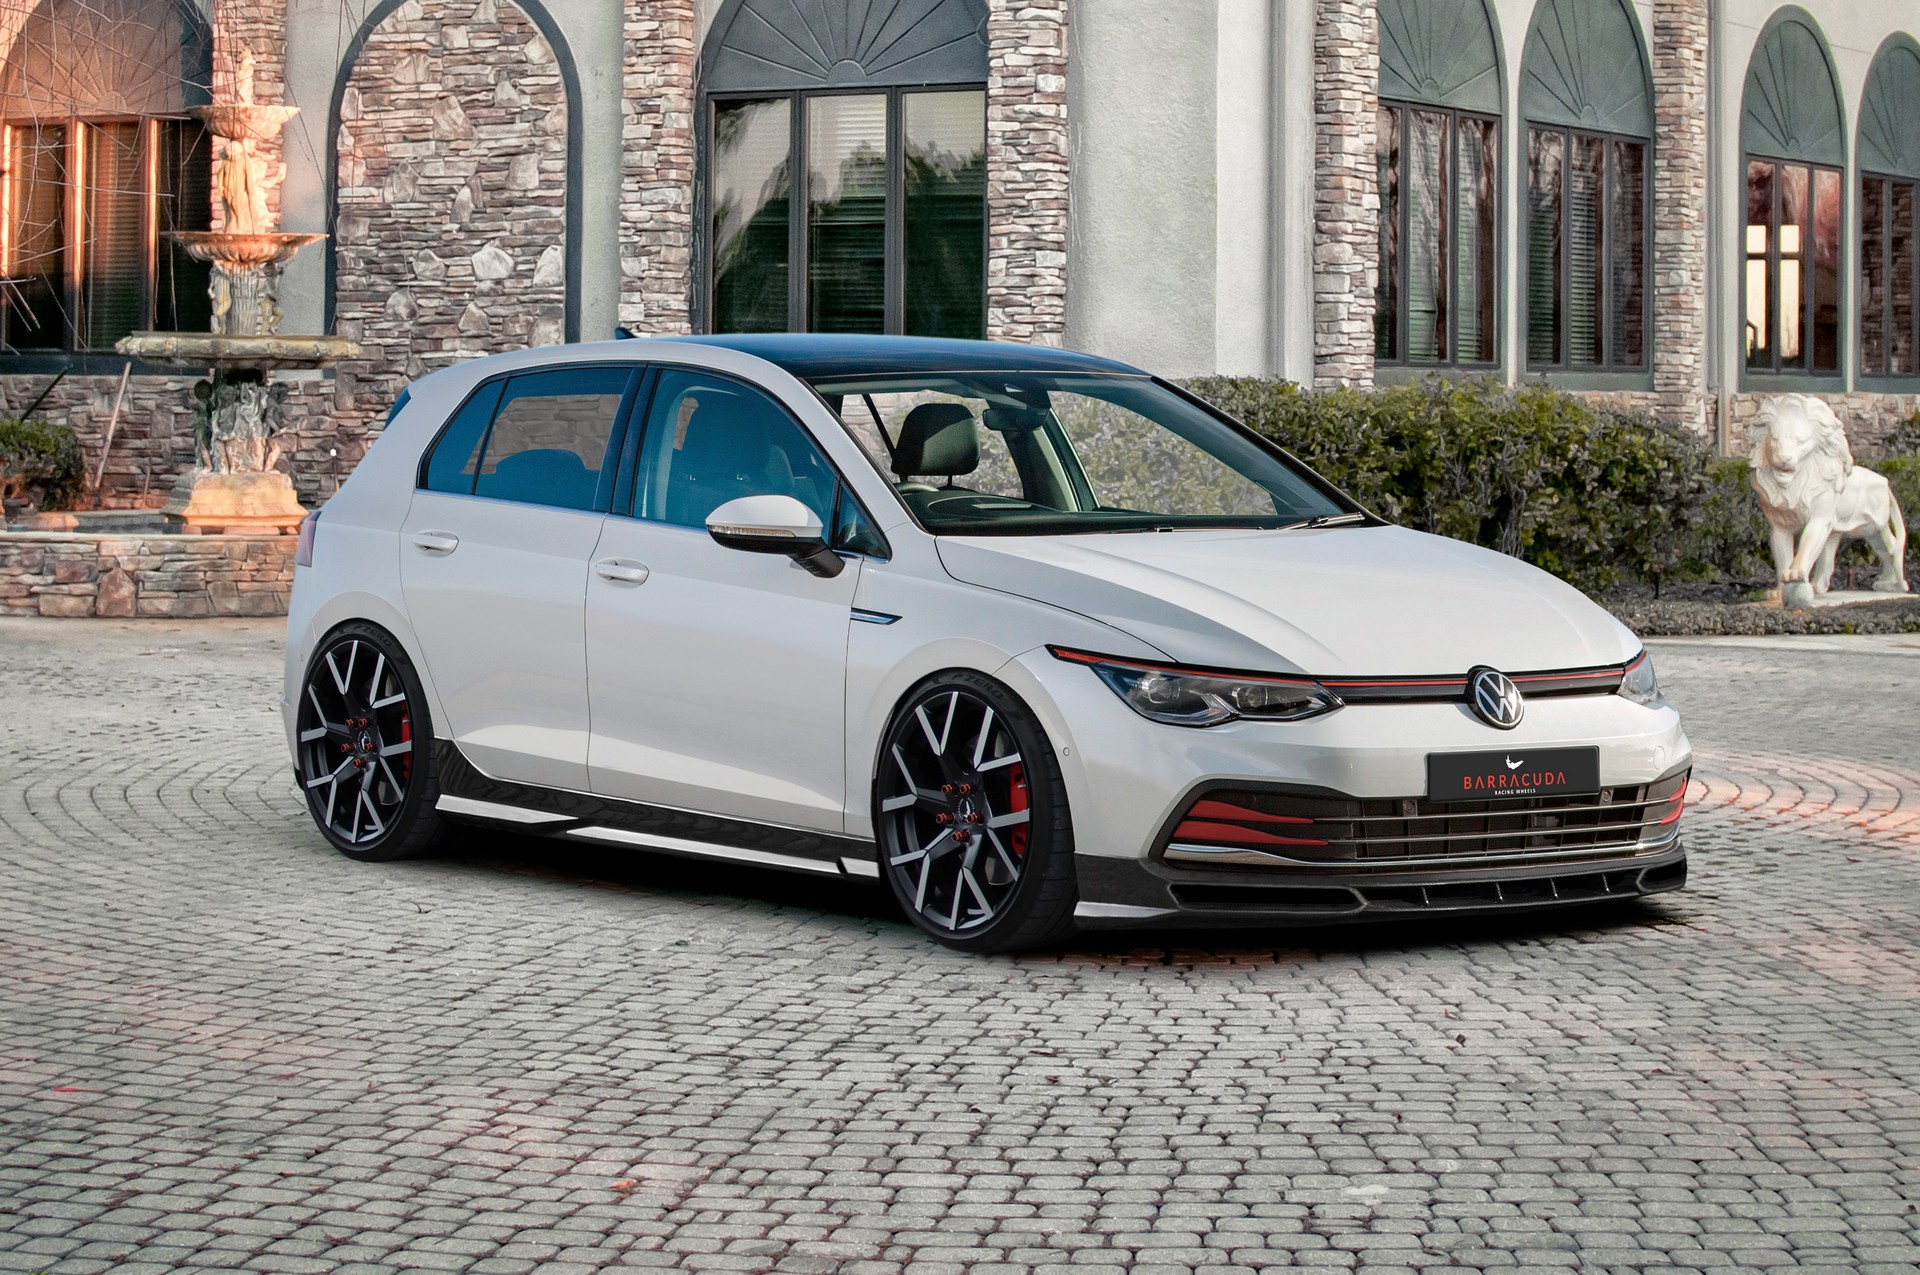 JMS Previews Tuning Offering For VW Golf 8